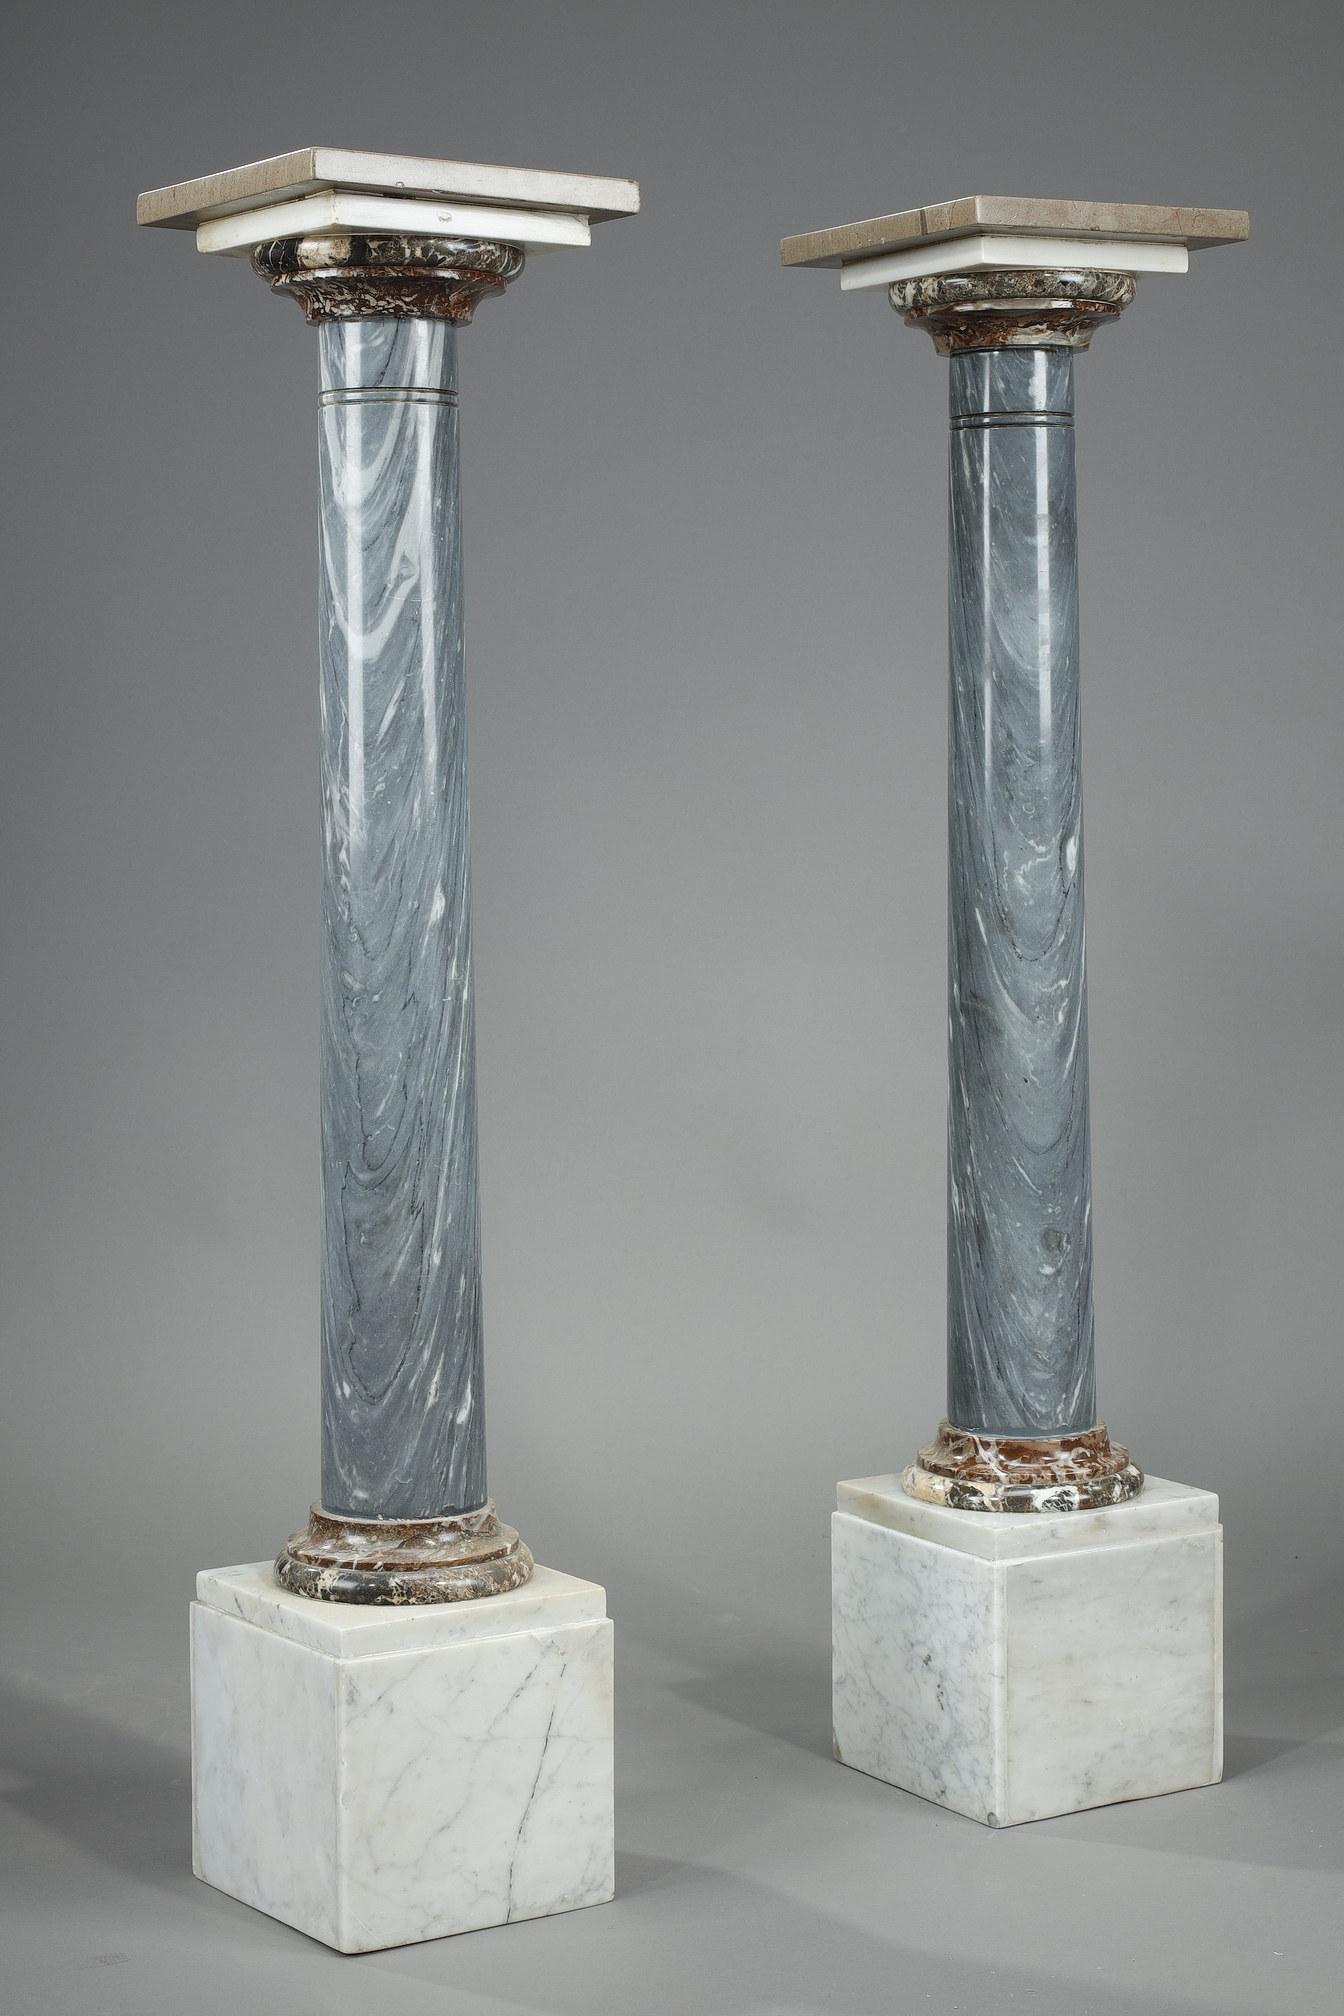 Two Napoleon III period columns composed of a great variety of marbles in rare colors of blue and violet. The shaft in 